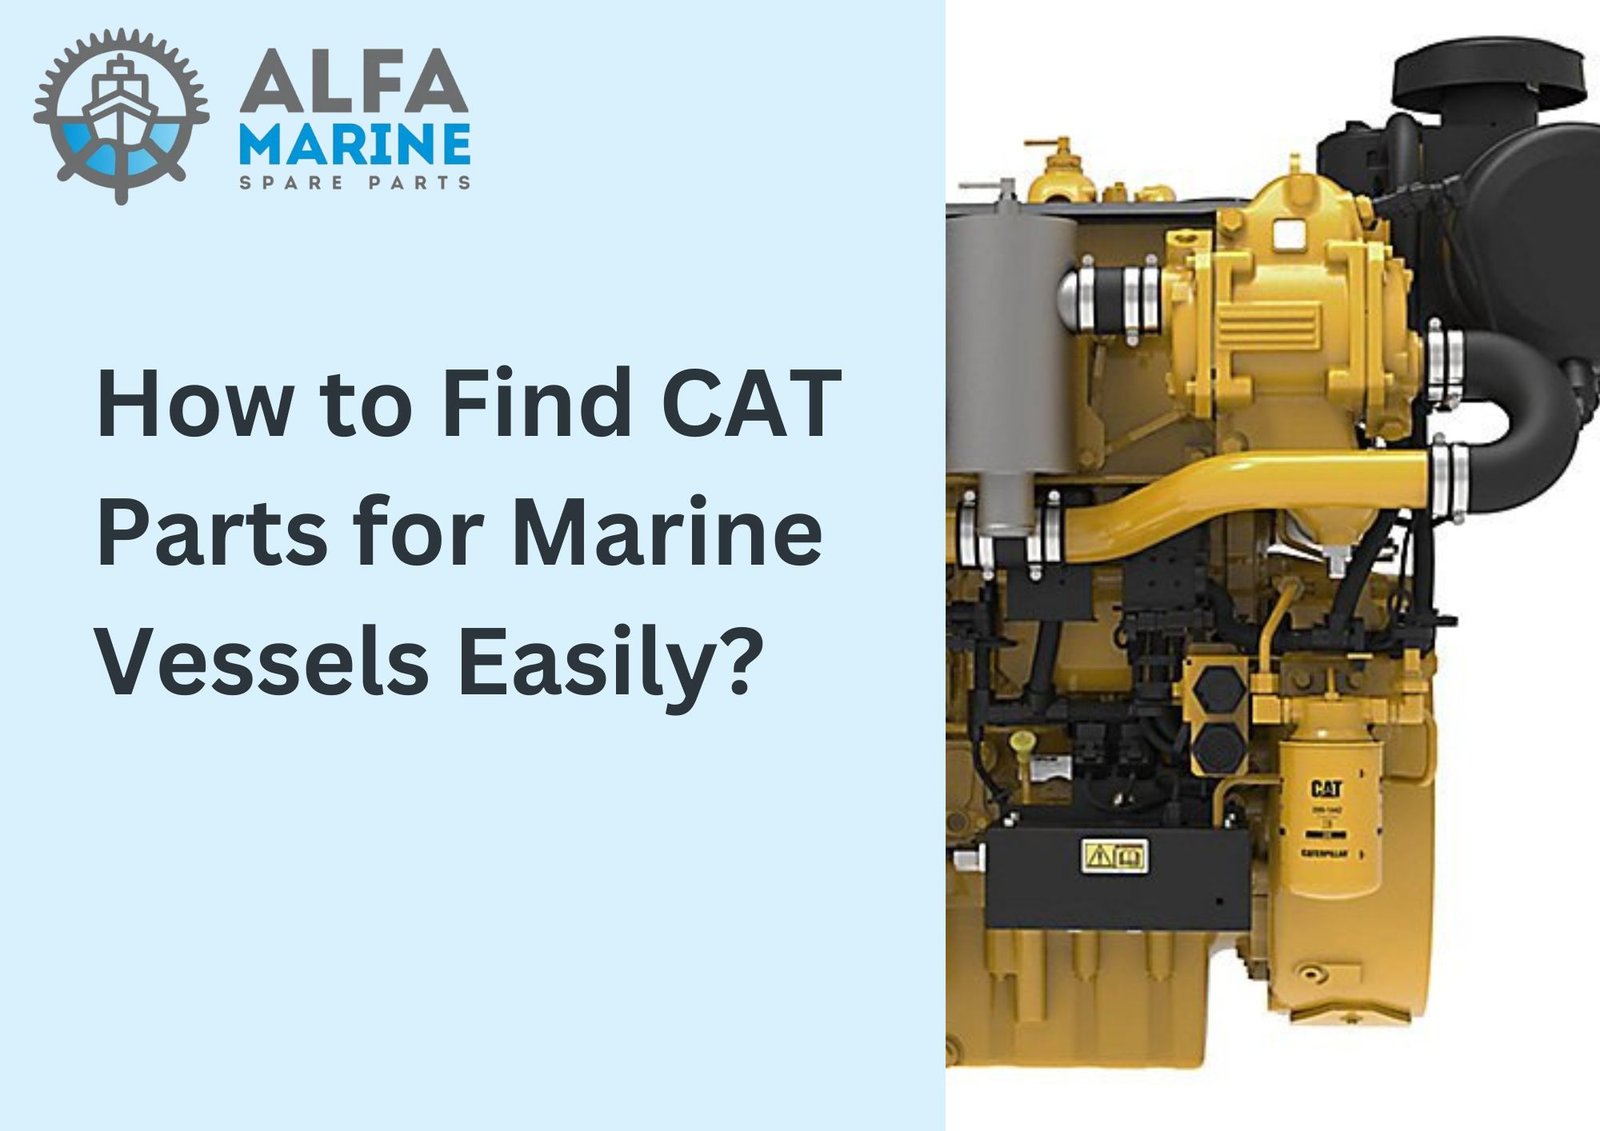 How to Find CAT Parts for Marine Vessels Easily?